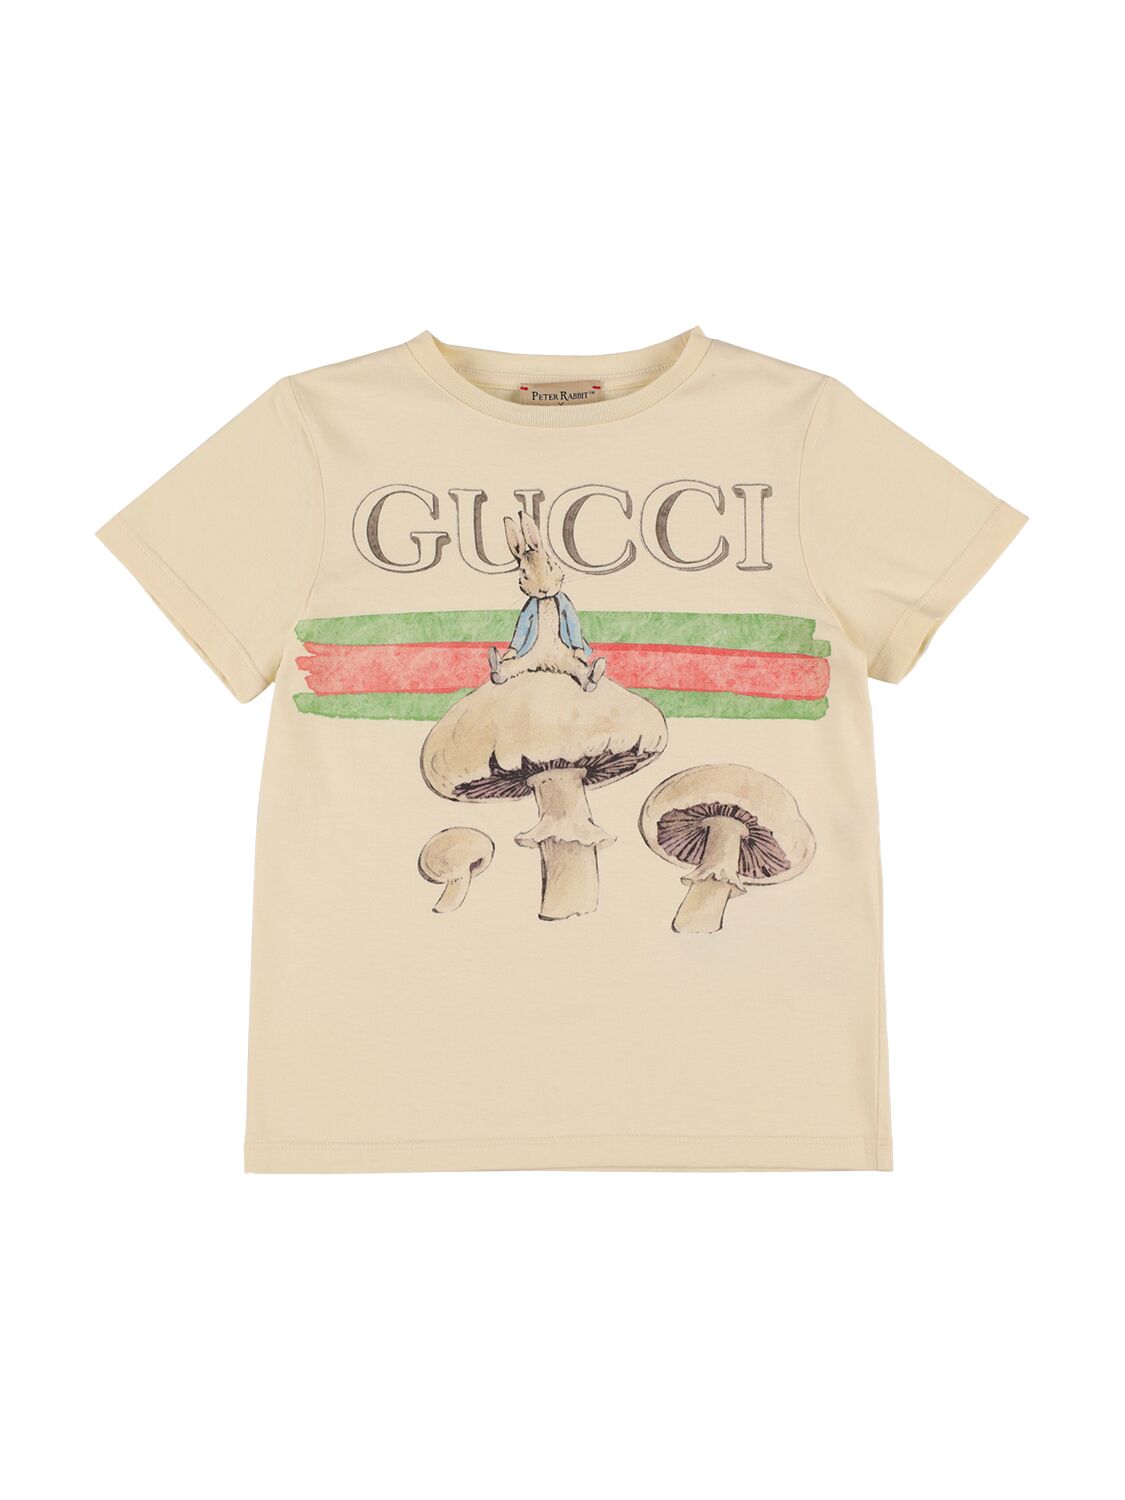 Gucci Kids' T-shirt T-shirt In Sunkissed,multi